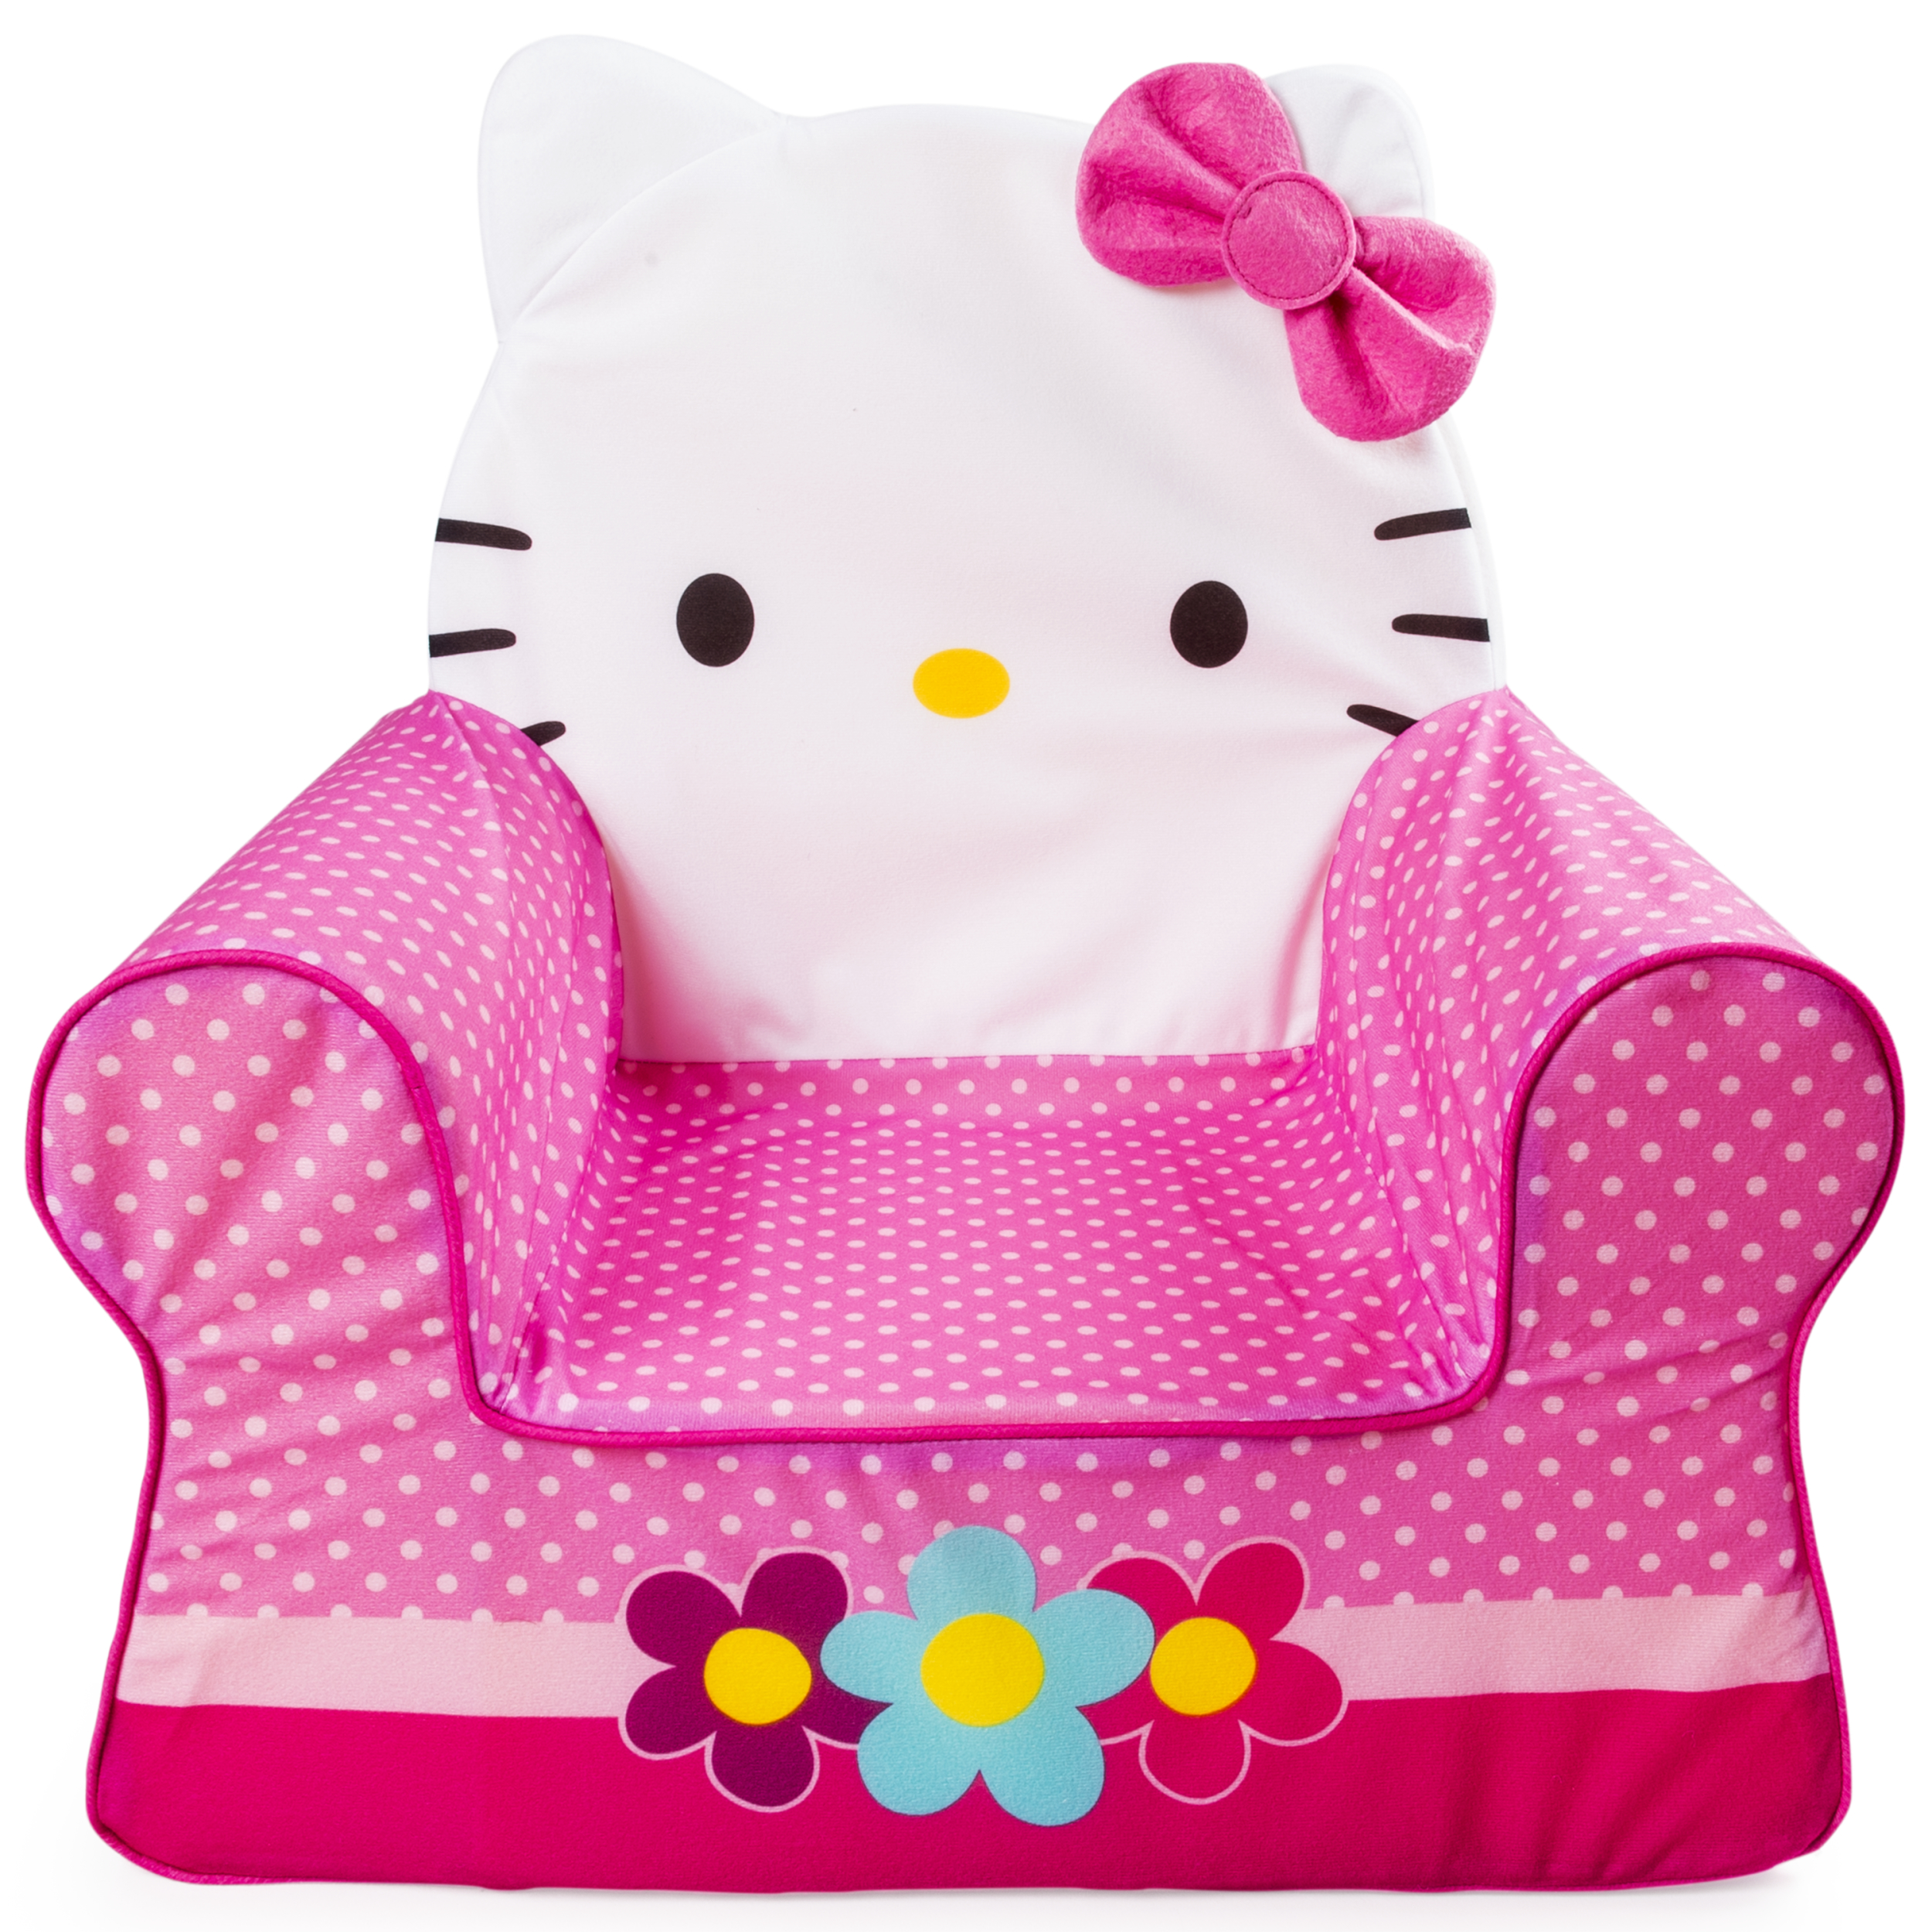 Marshmallow Furniture, Children's Foam Comfy Chair, Hello Kitty, by Spin Master - image 1 of 2